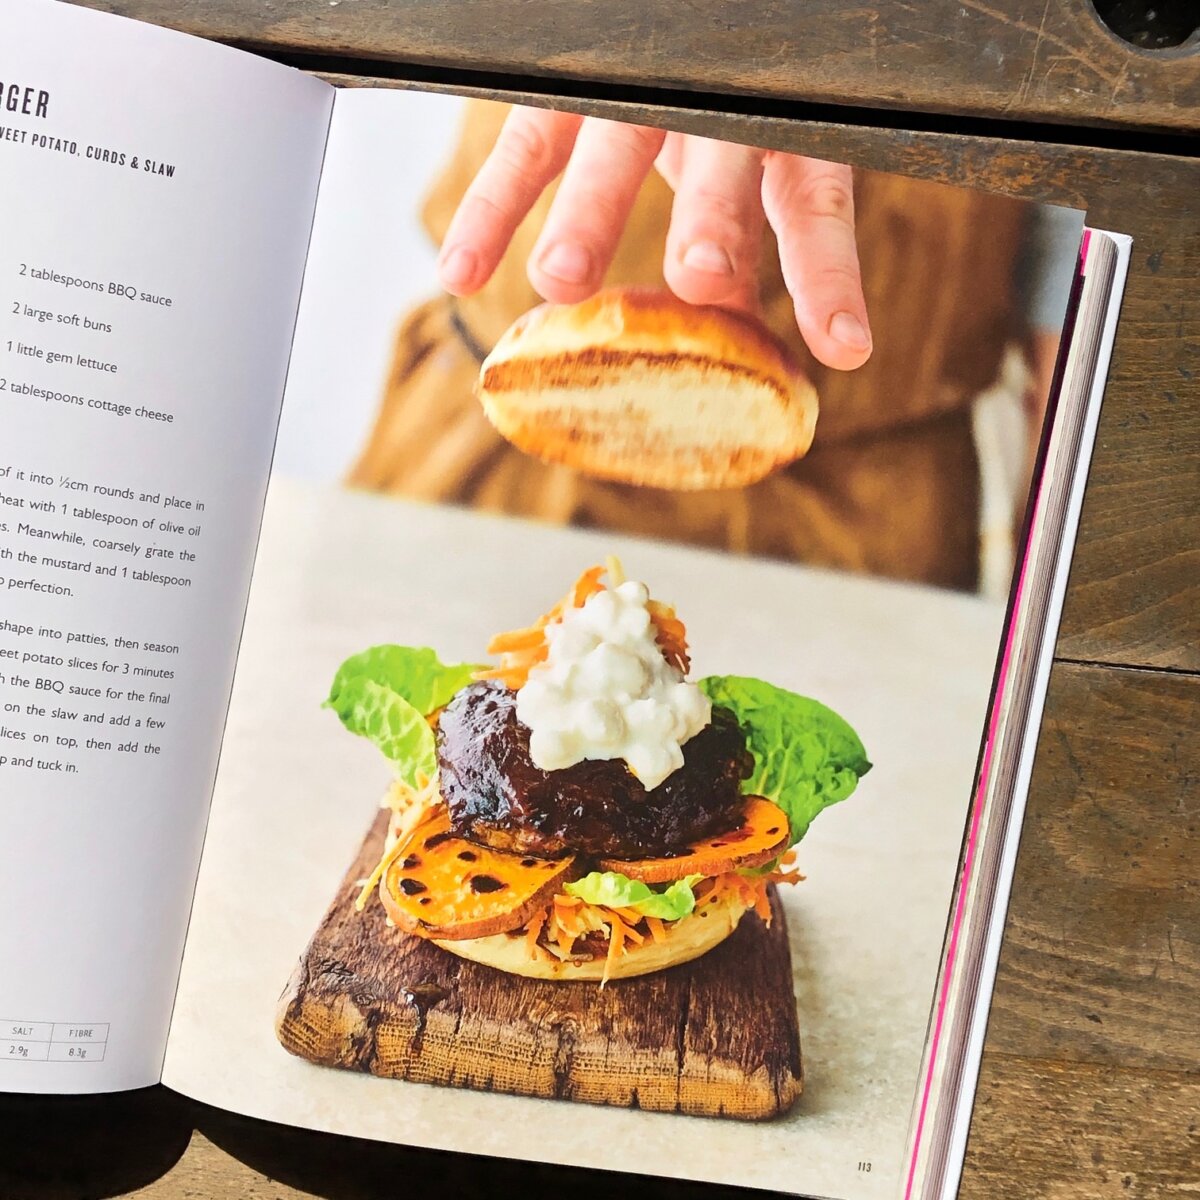 Levon Biss – yes that’s right, Levon Biss has just shot Jamie Oliver’s latest food book. - CRXSS